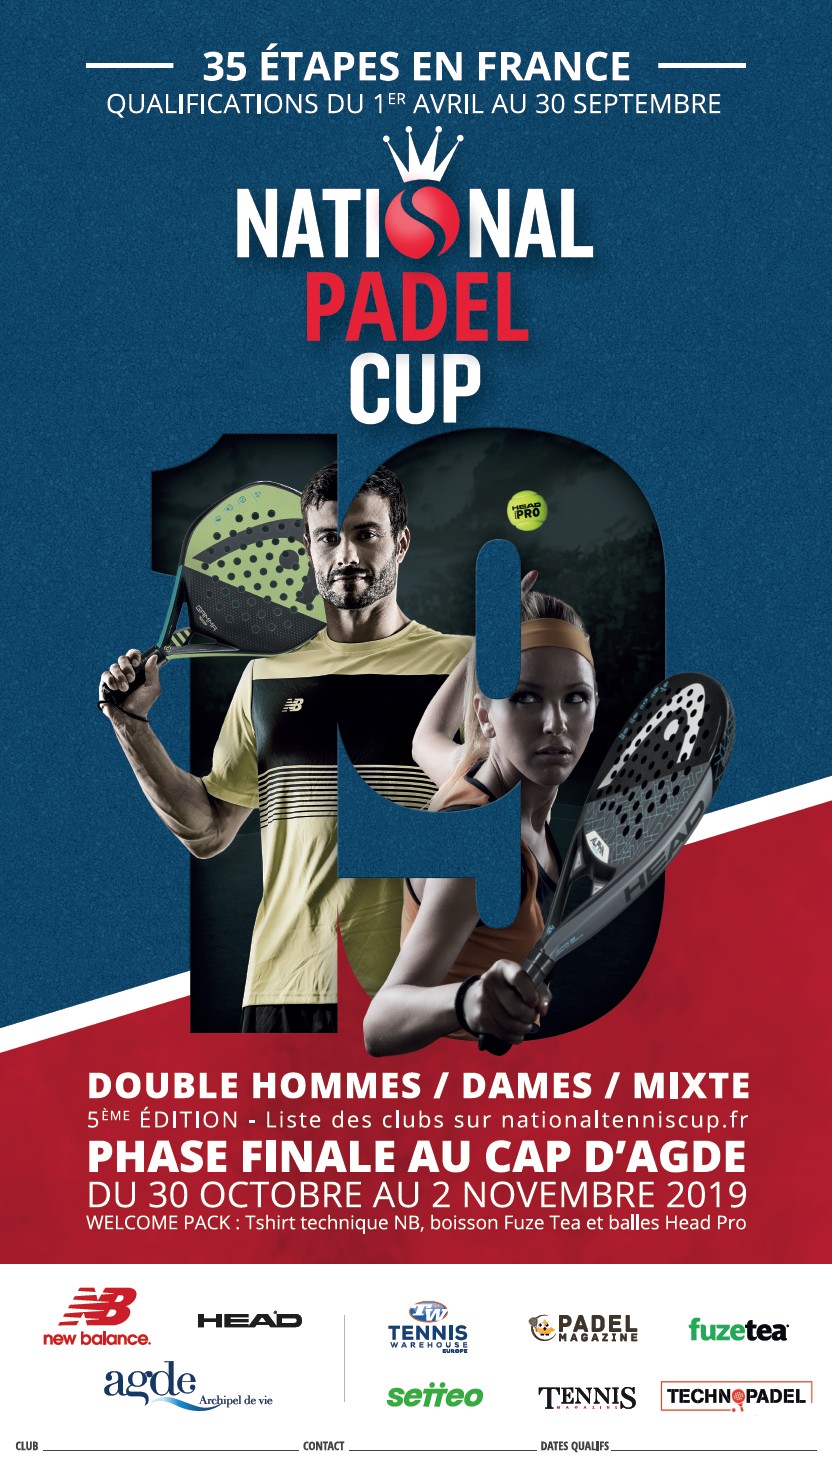 The National Padel Cup: 35 stages in France